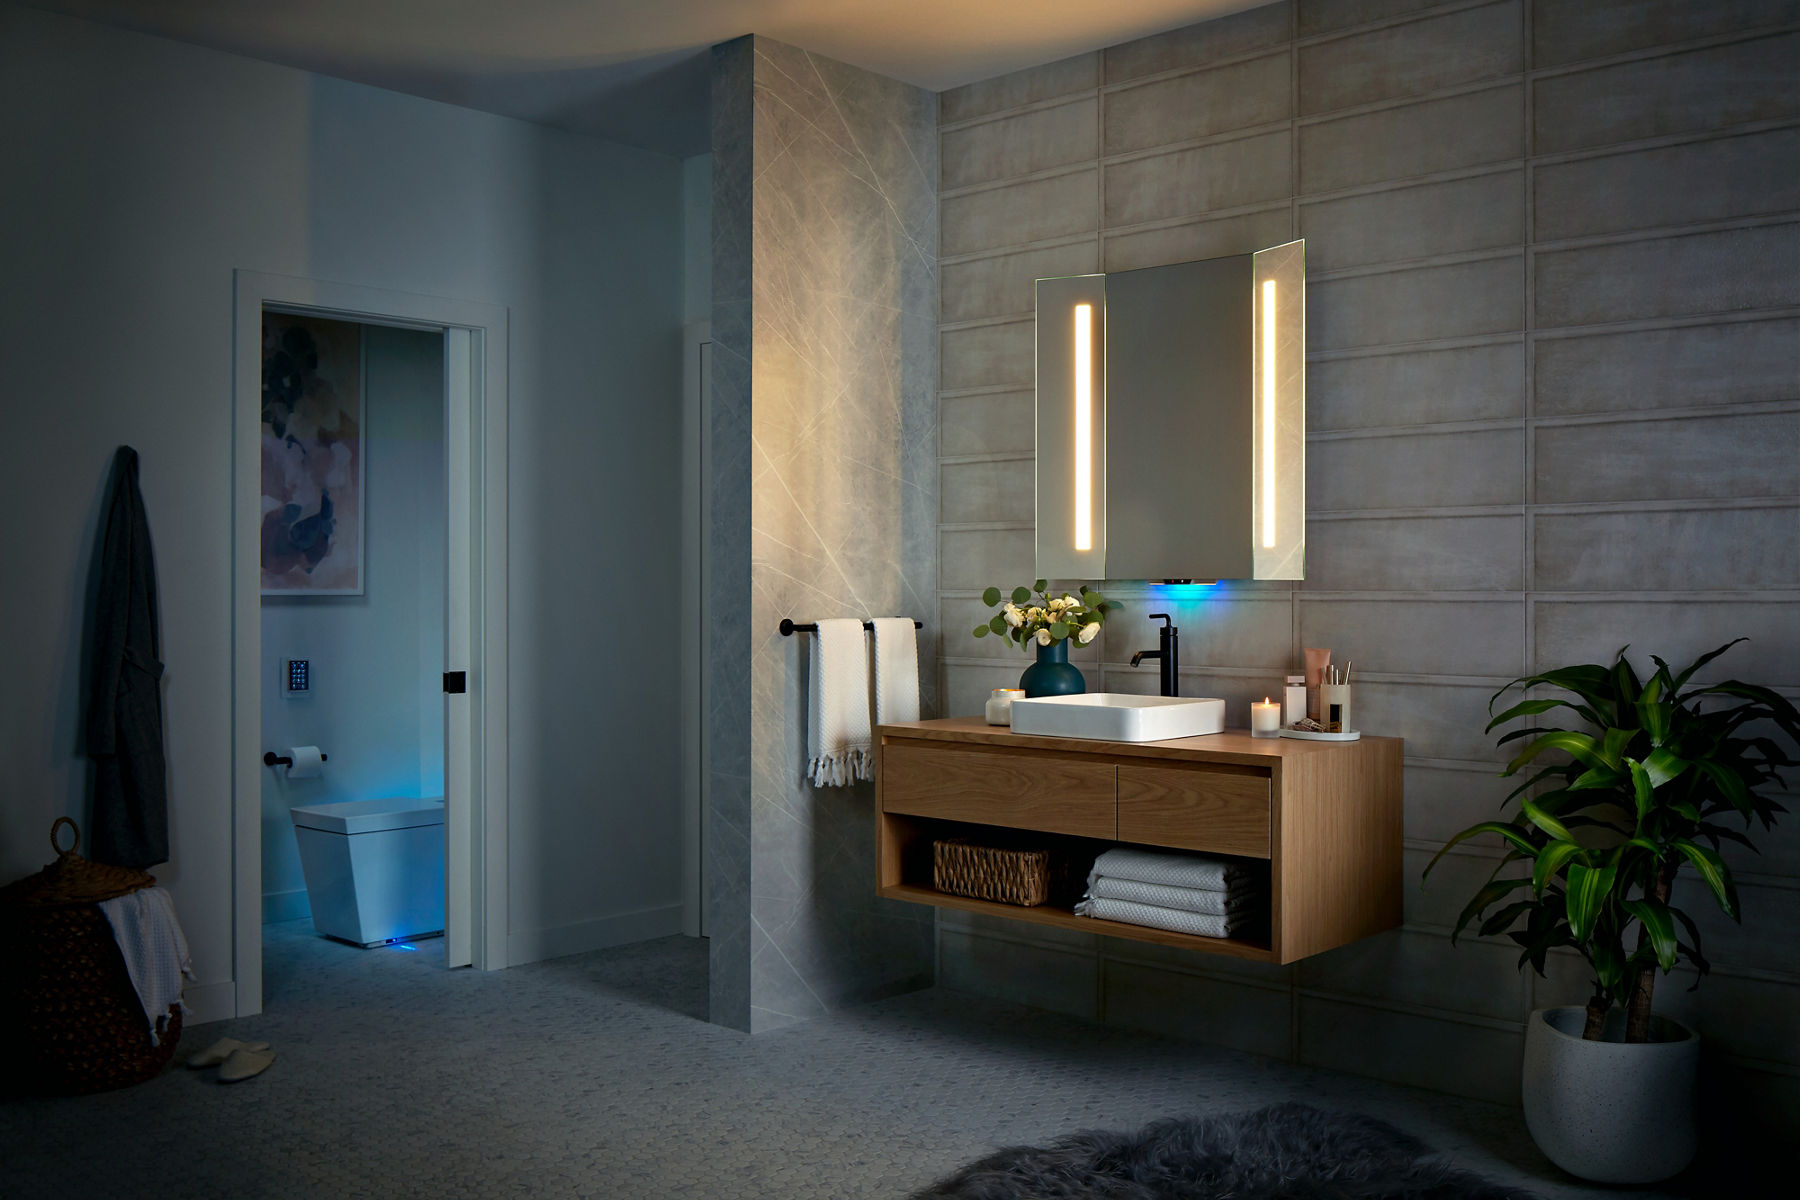 Minimalist Modern Bright Shower Room With A Daylight Lamp In The Ceiling To  Create The Illusion Of A Window Dark Hardware To Create Contrast With Light  Walls Shower Toilet Bidet And Washbasin